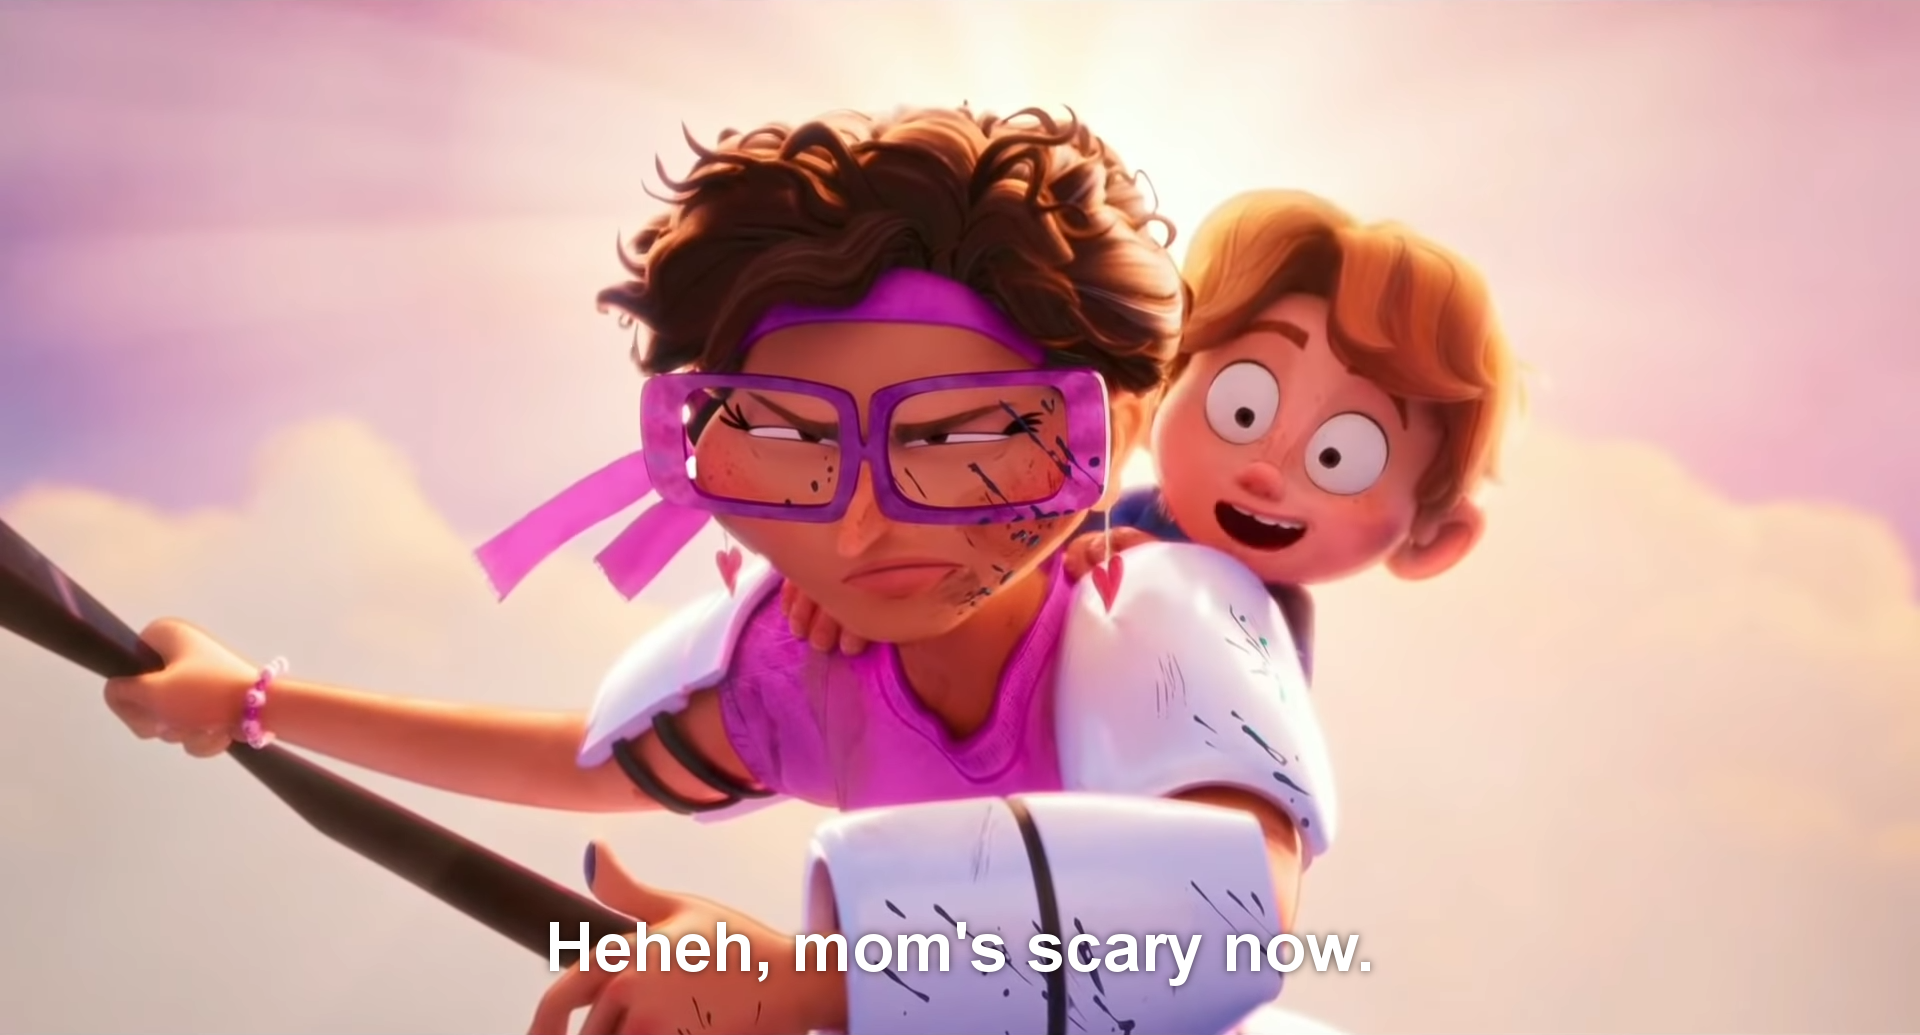 Mom's Scary Now Blank Meme Template